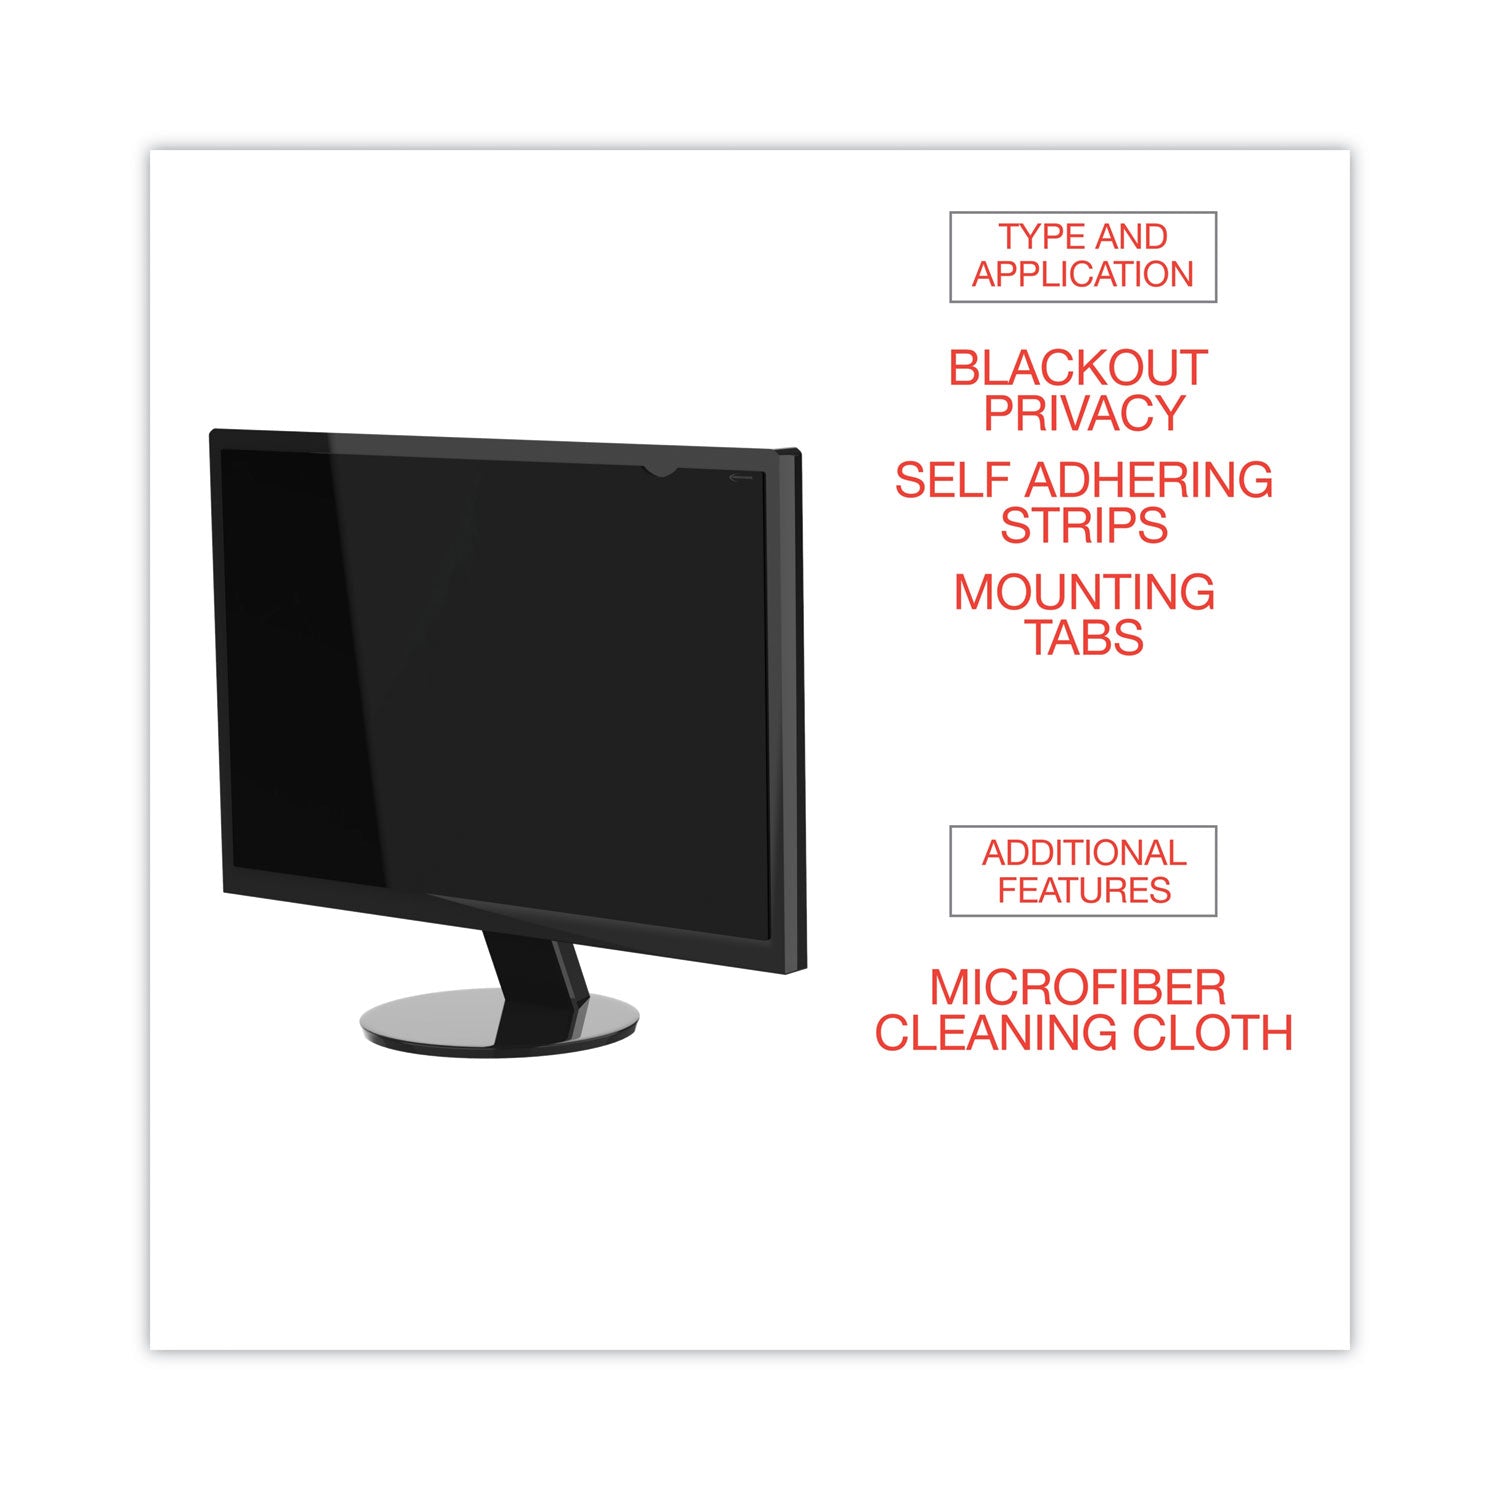 blackout-privacy-monitor-filter-for-201-widescreen-flat-panel-monitor-1610-aspect-ratio_ivrblf201w - 6